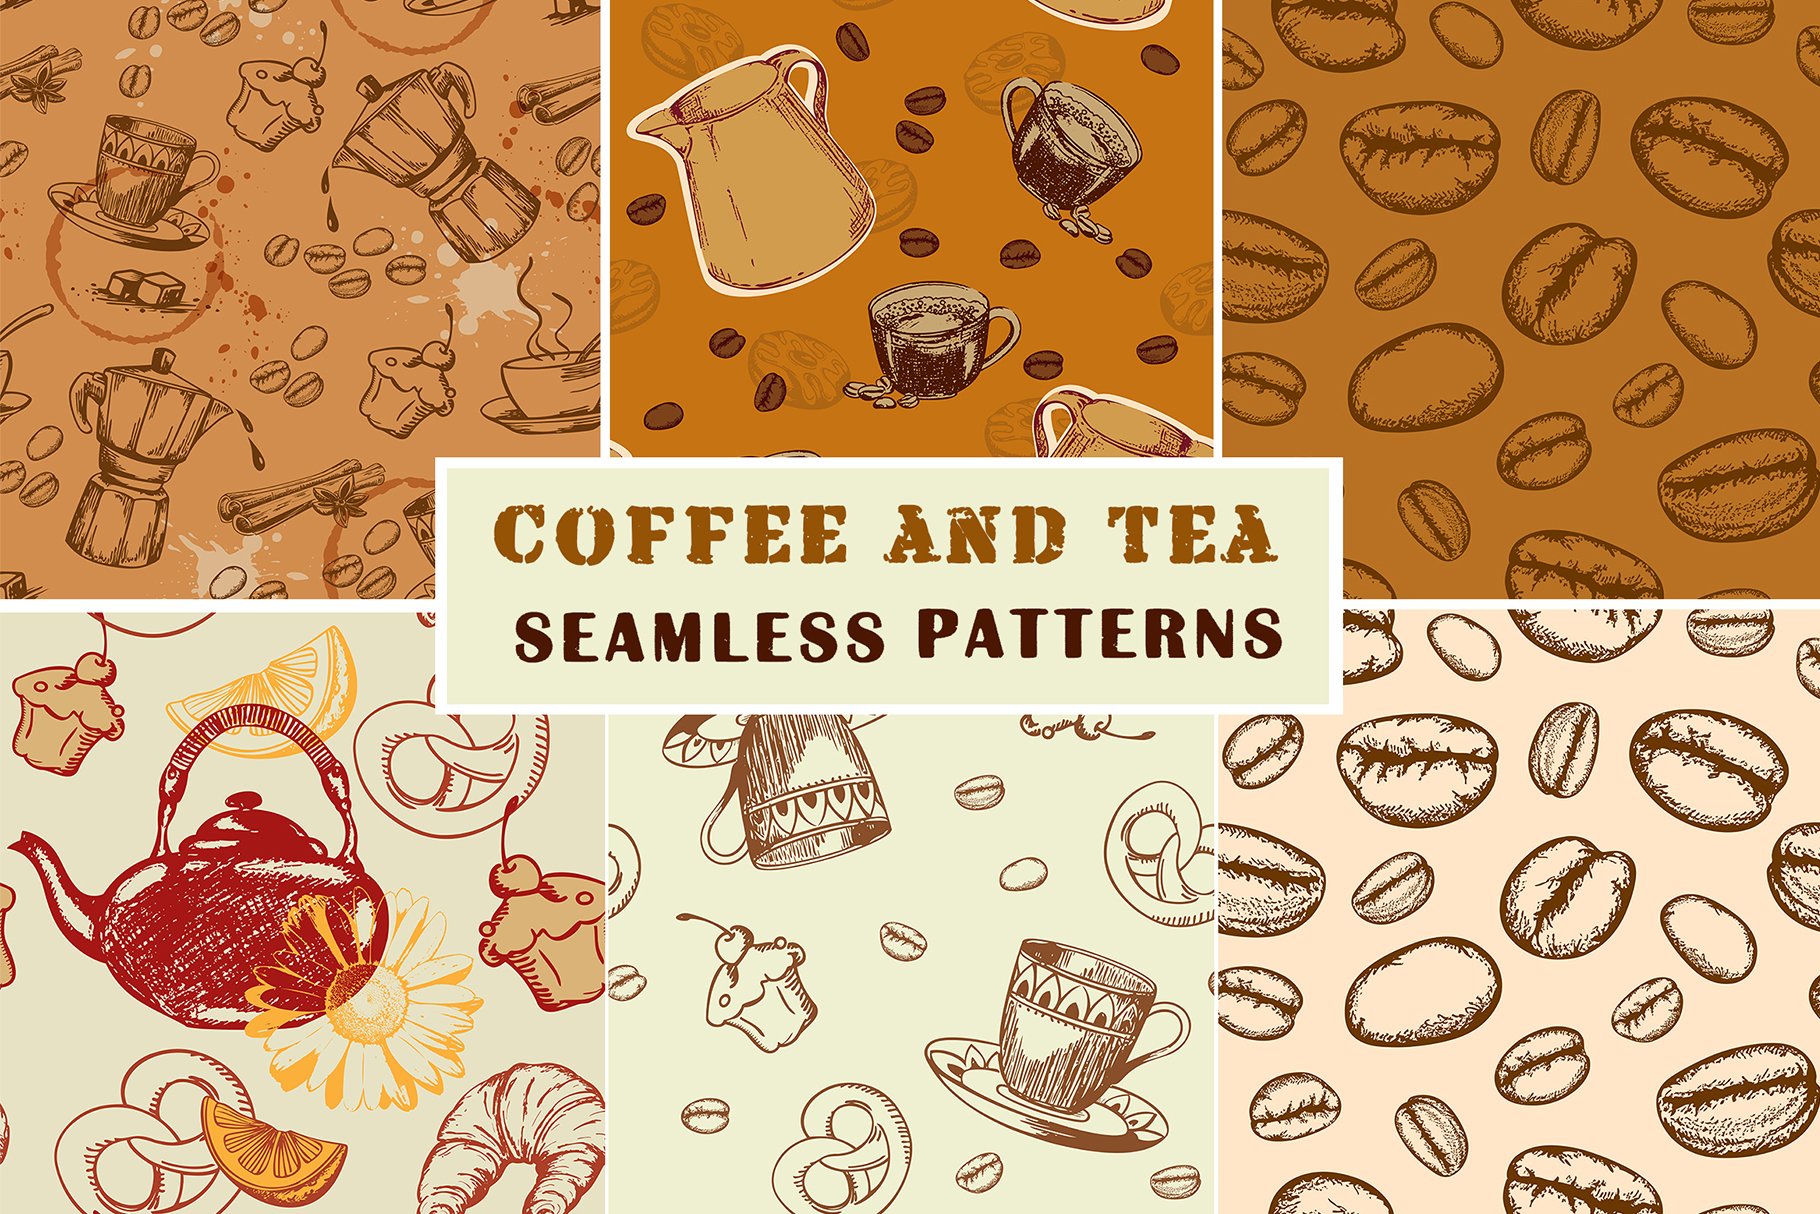 Vintage Coffee Seamless Patterns cover image.